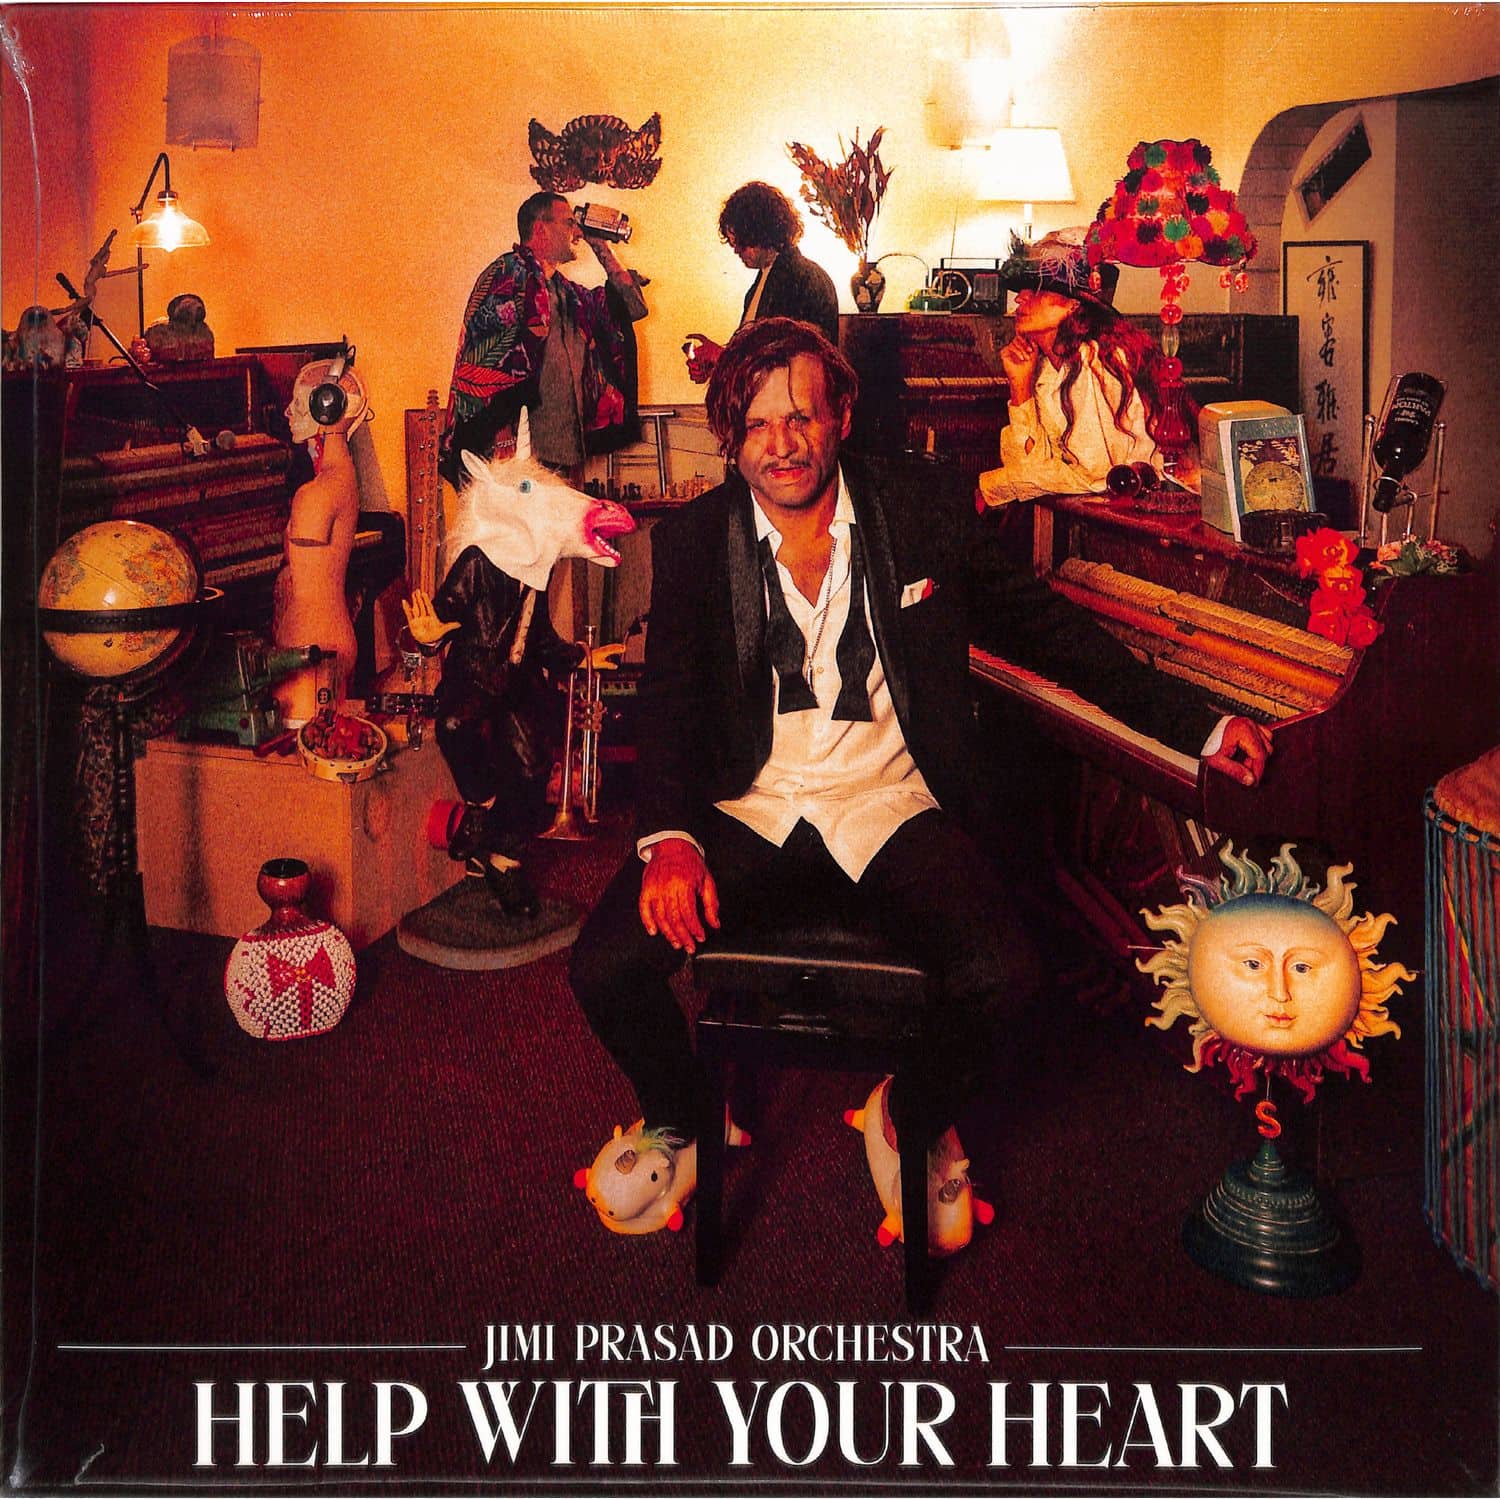 Jimi Prasad Orchestra - HELP WITH YOUR HEART 